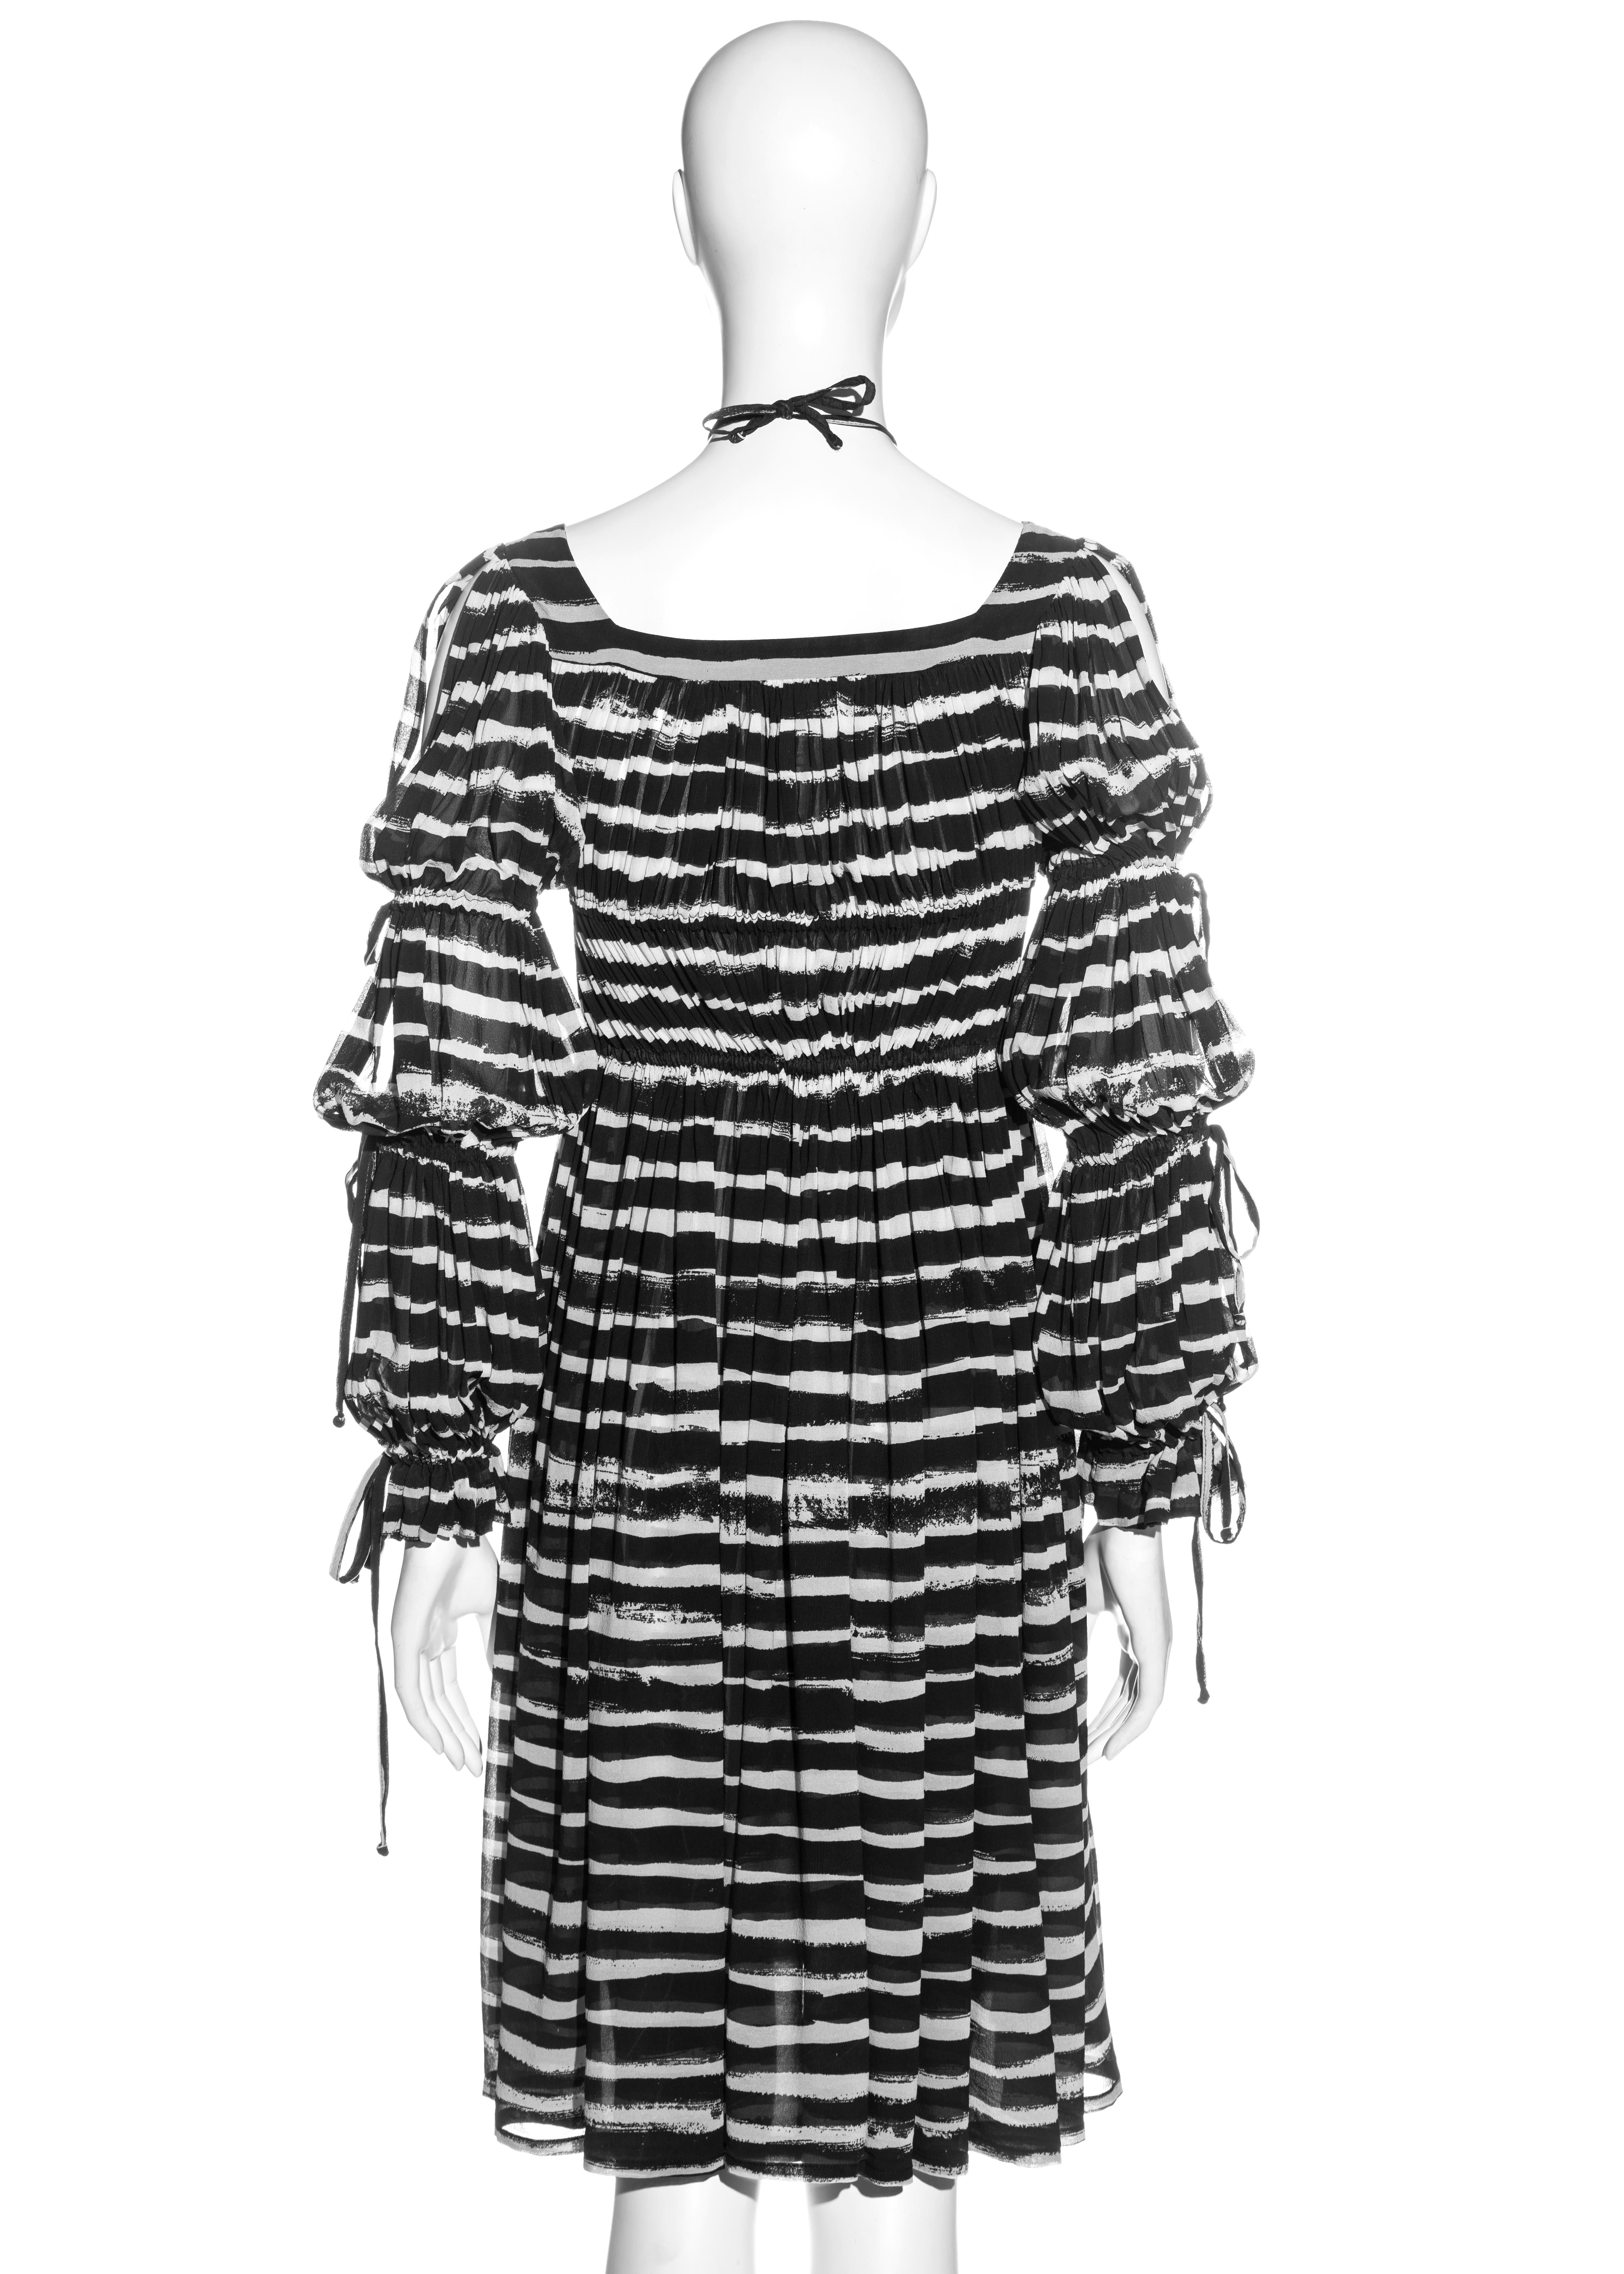 Vivienne Westwood black and white striped cotton gathered dress, ss 1996 For Sale 1